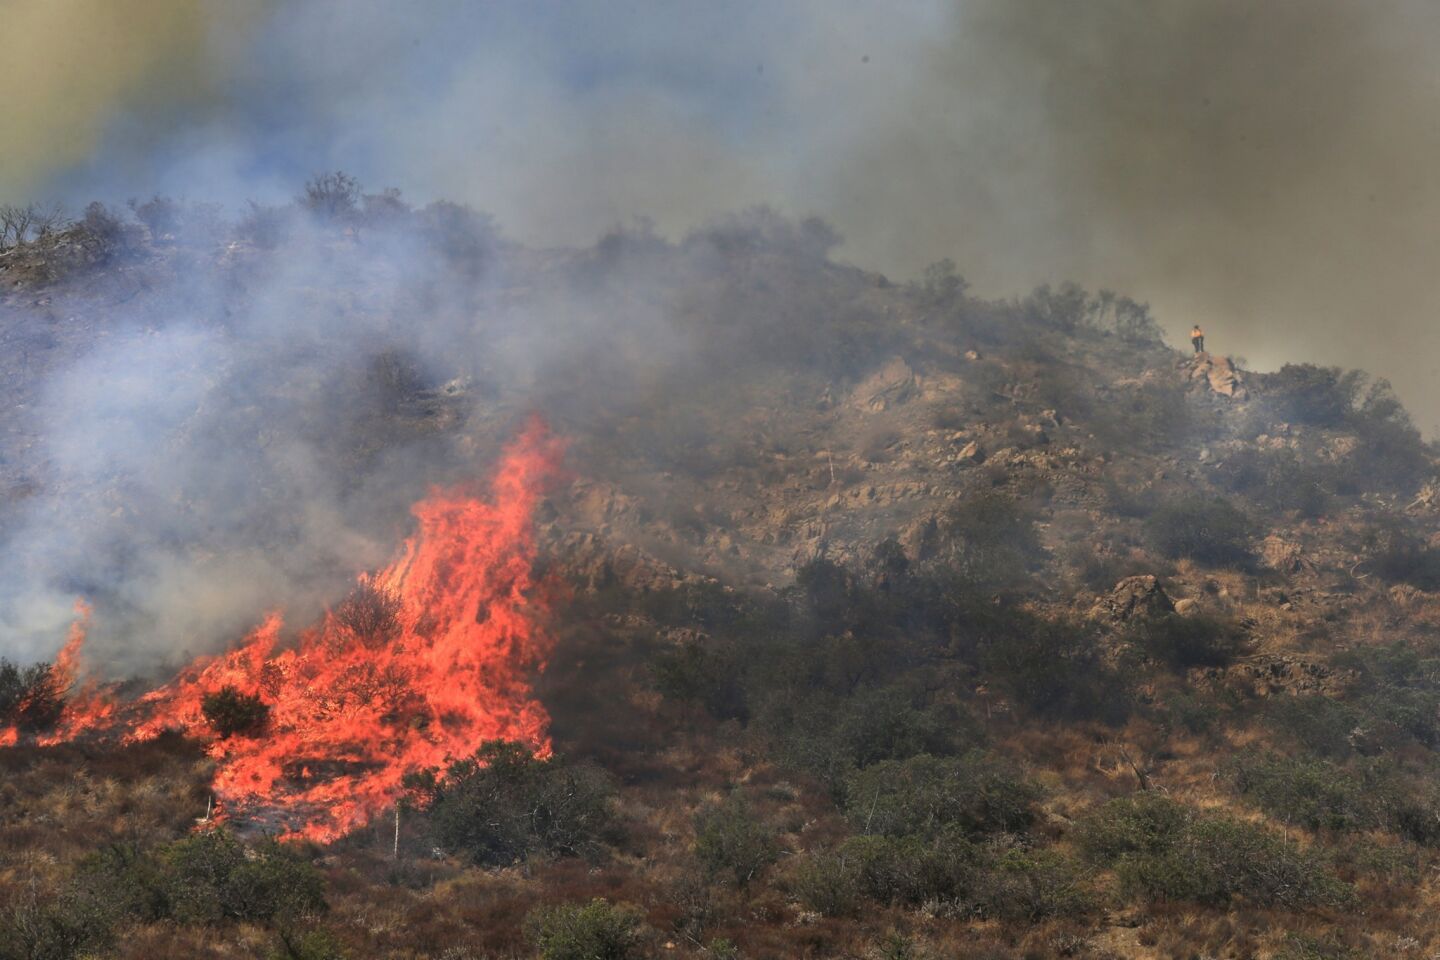 More than 280 firefighters are aided by water-dropping helicopters and fixed-wing aircraft as they battle a 1,300-acre fire in Silverado Canyon.